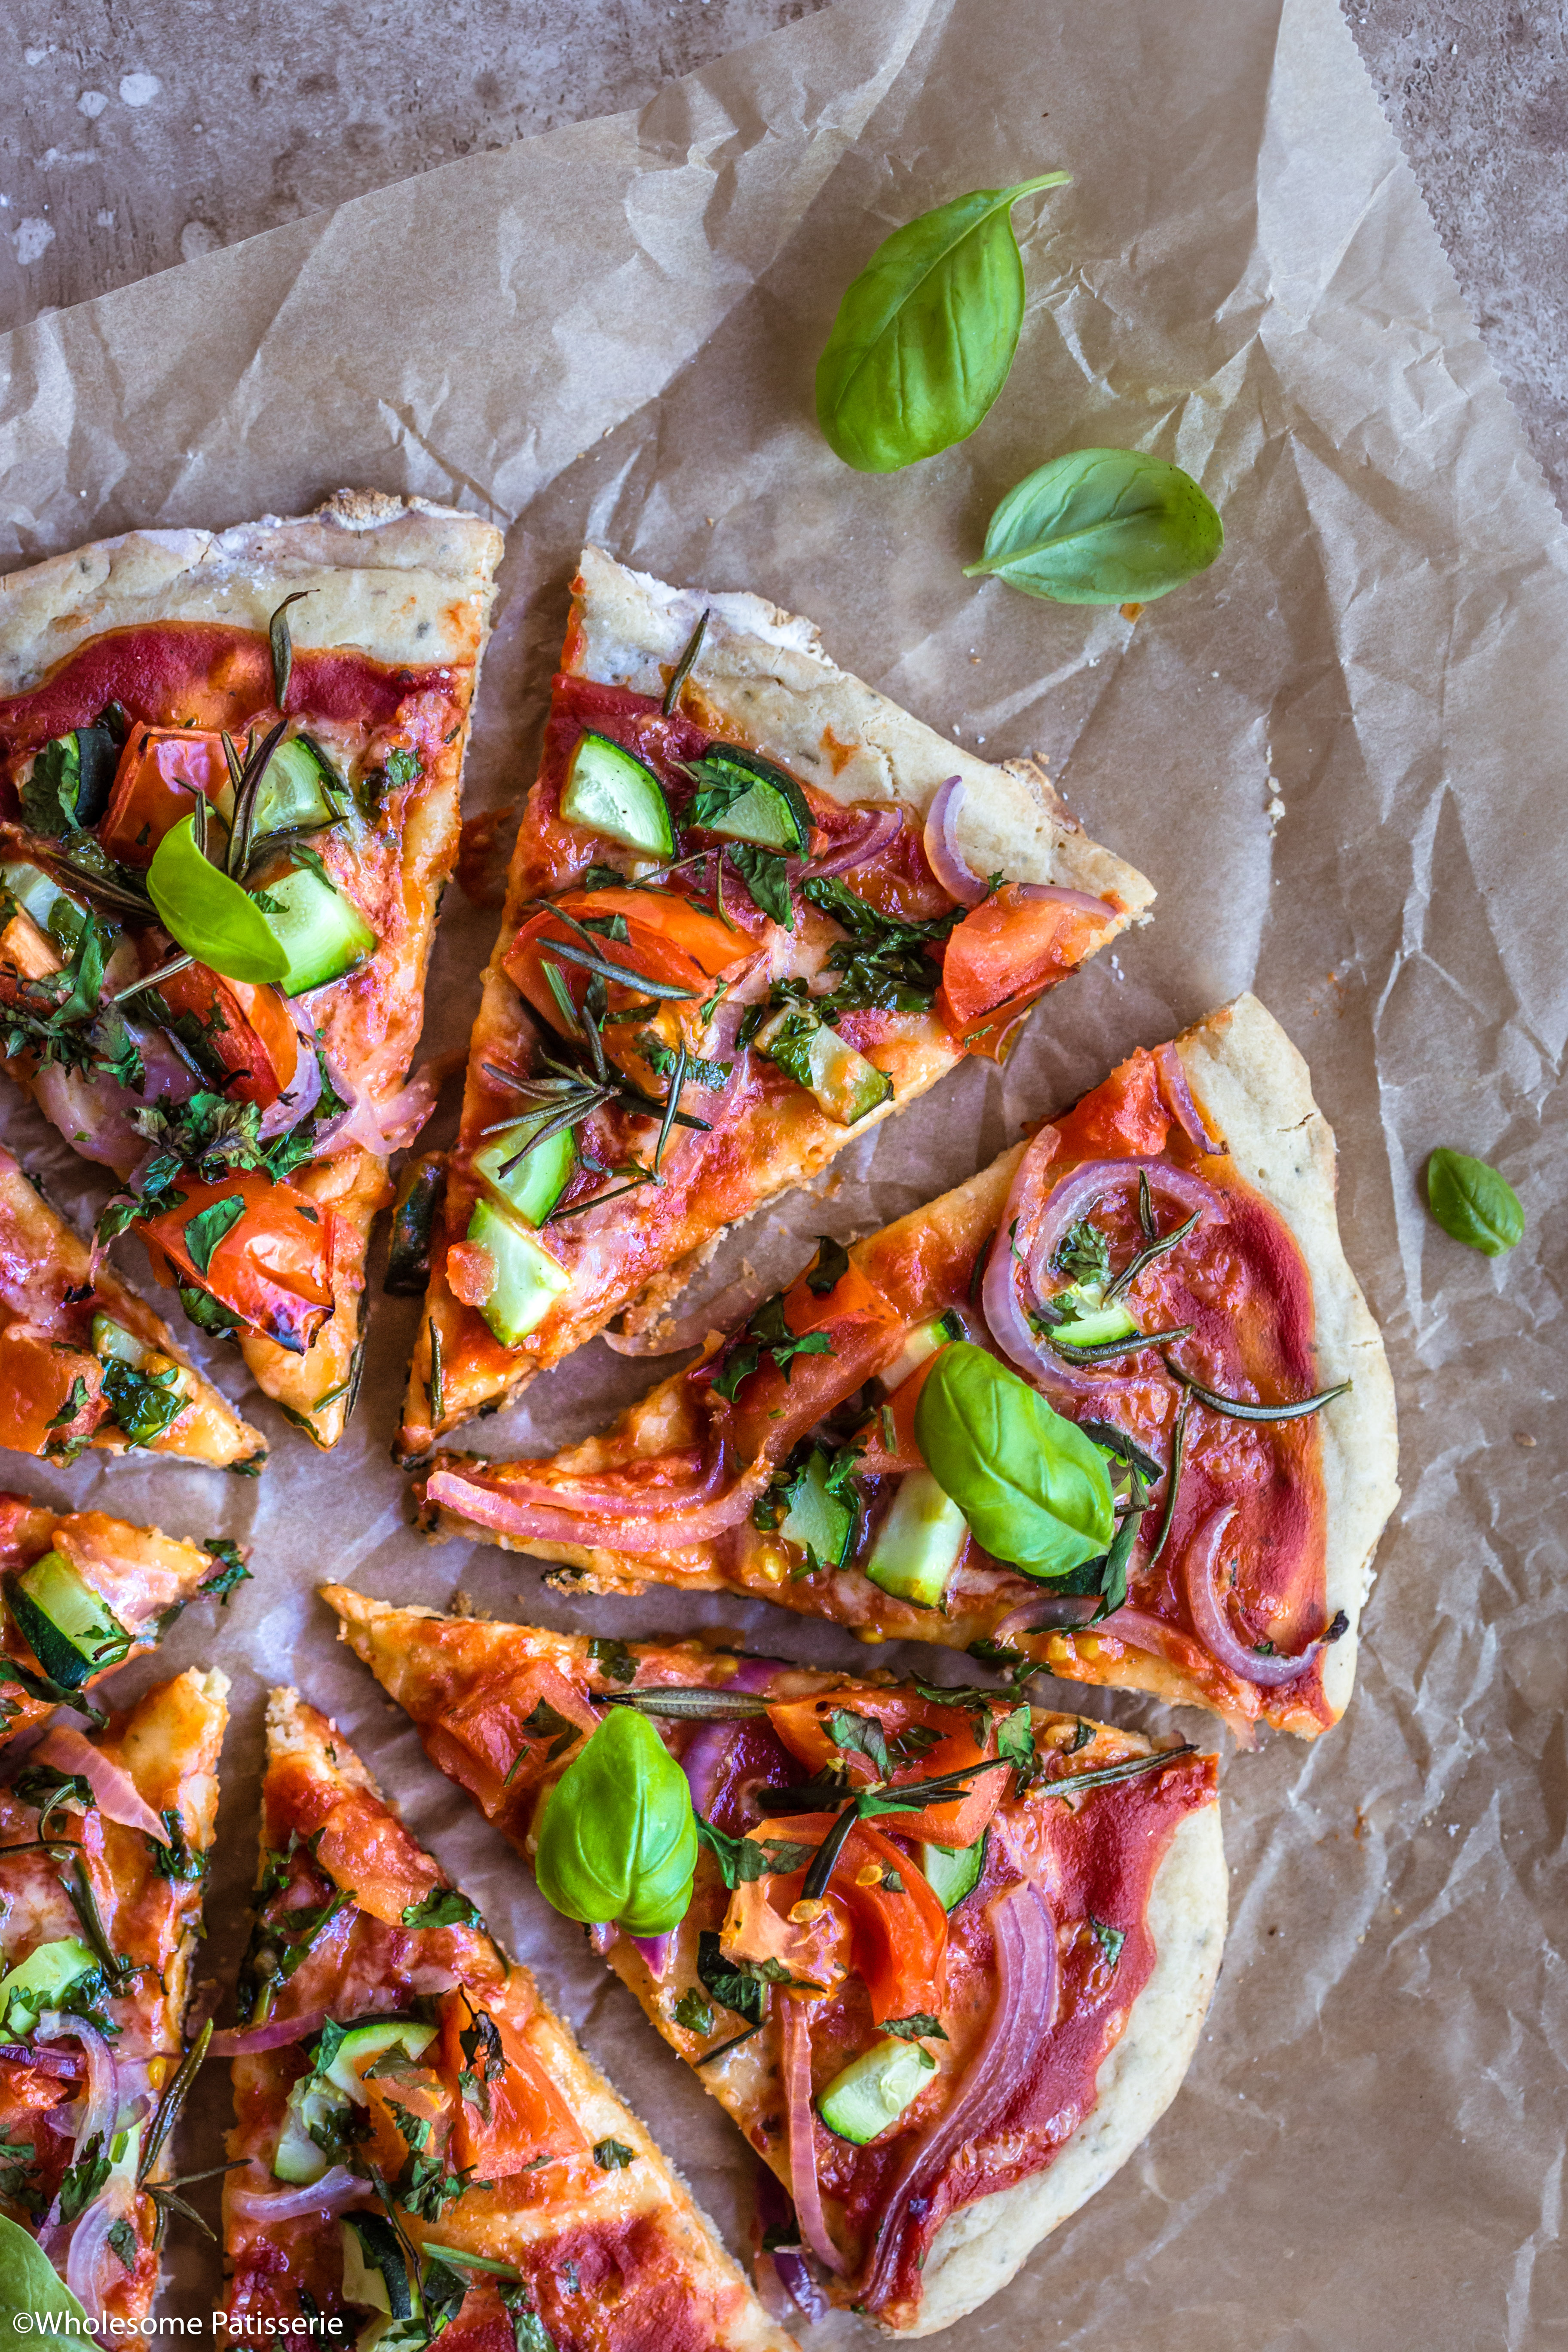 Gluten Free Pizza! Simple homemade pizza base topped with fresh, bursting with flavour veggies + herbs! #glutenfreepizza #glutenfree #pizza #vegetarianpizza